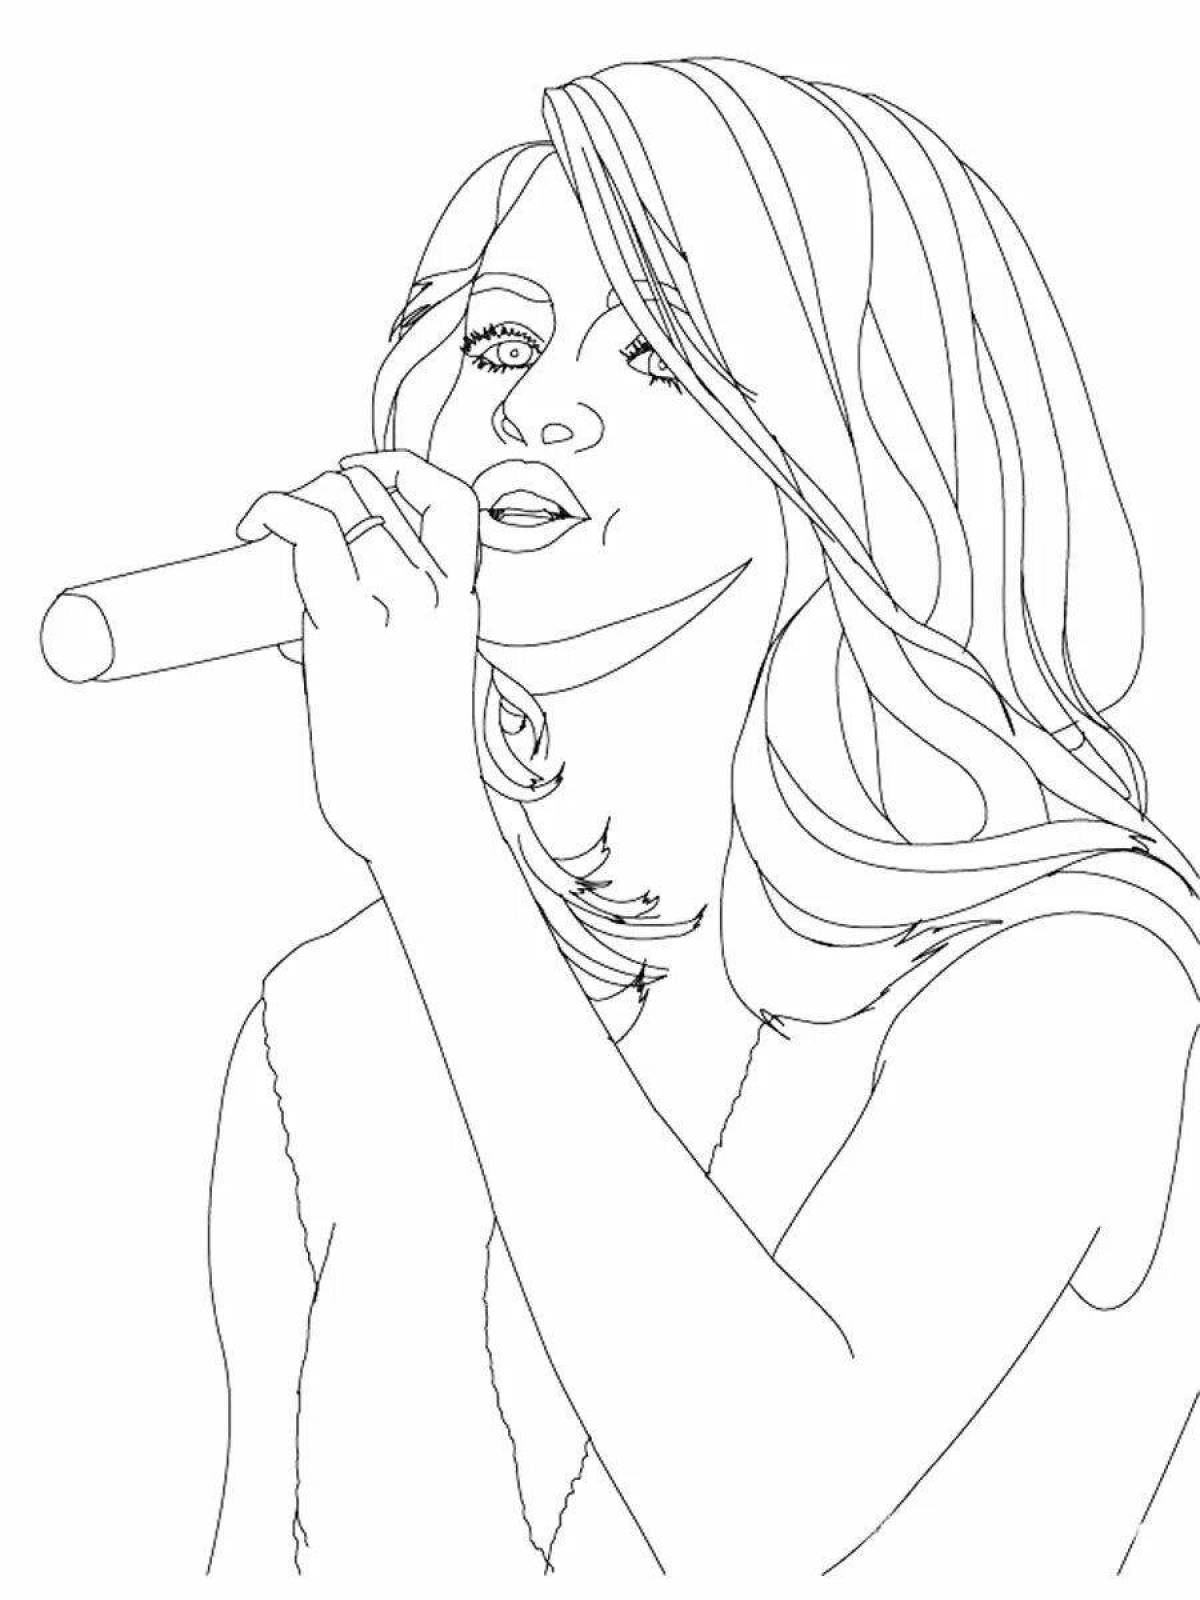 Jolly singer coloring pages for kids